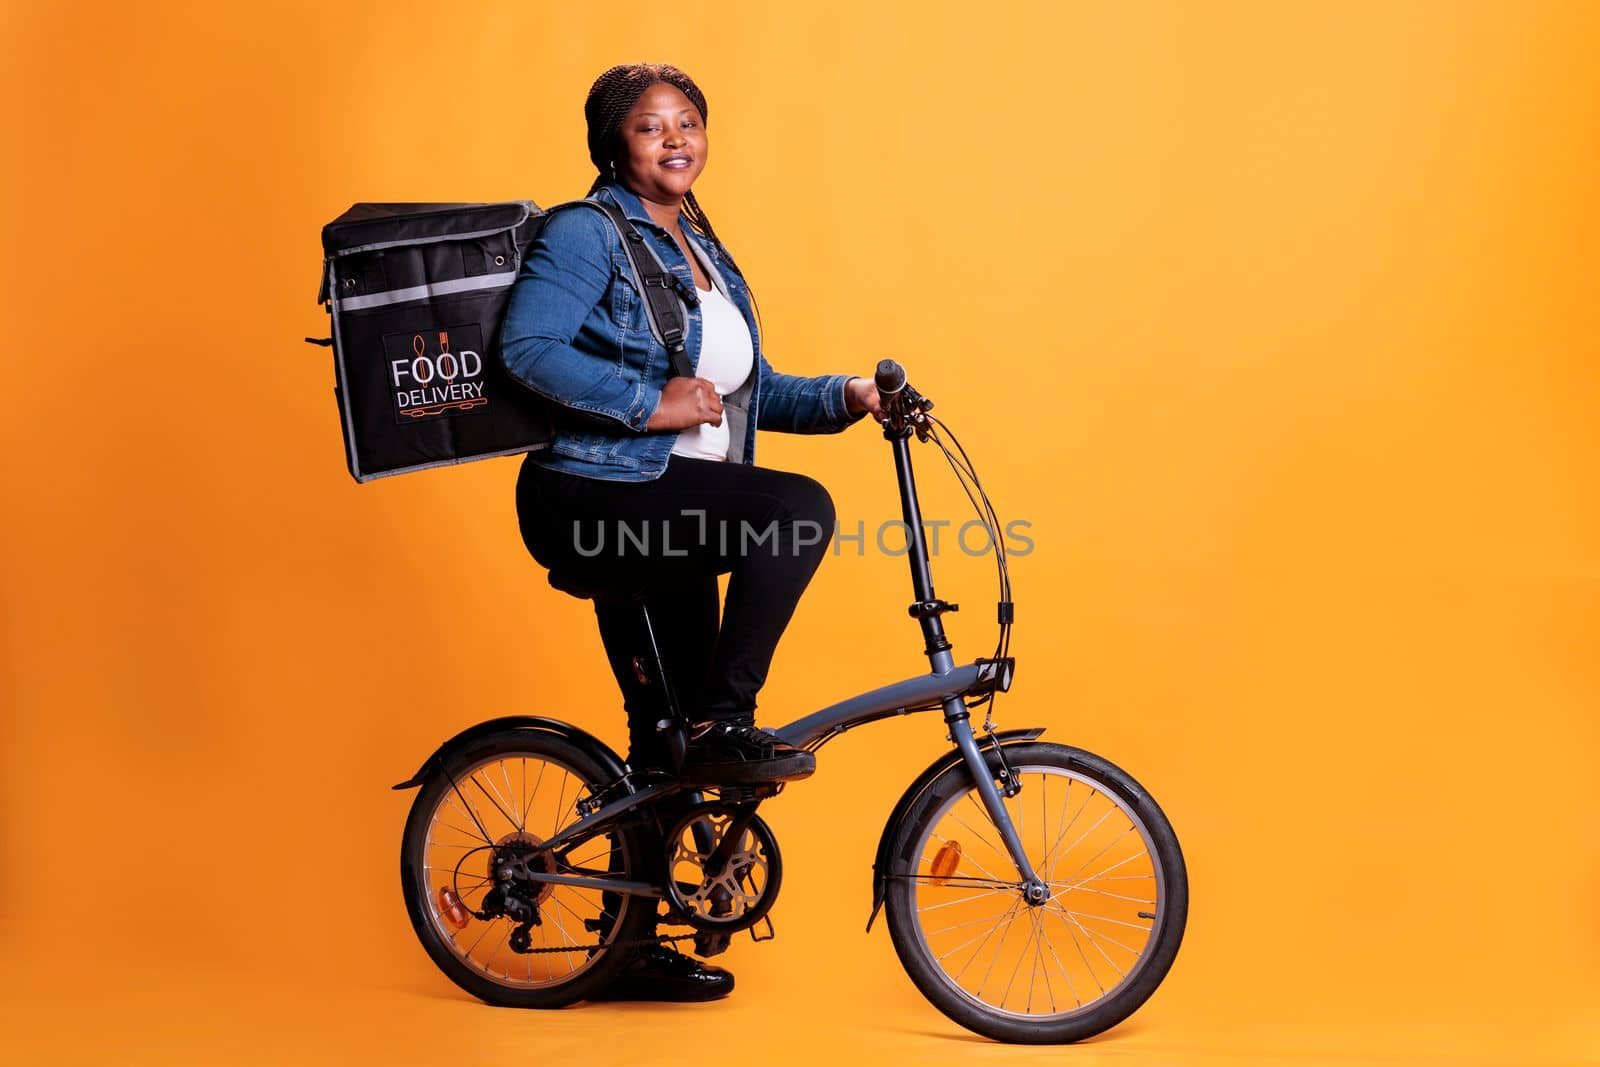 Portrait of fast food delivery worker riding bike during lunch time while carrying thermal takeout backpack, deliverying meal order to customer. Food service and transportation